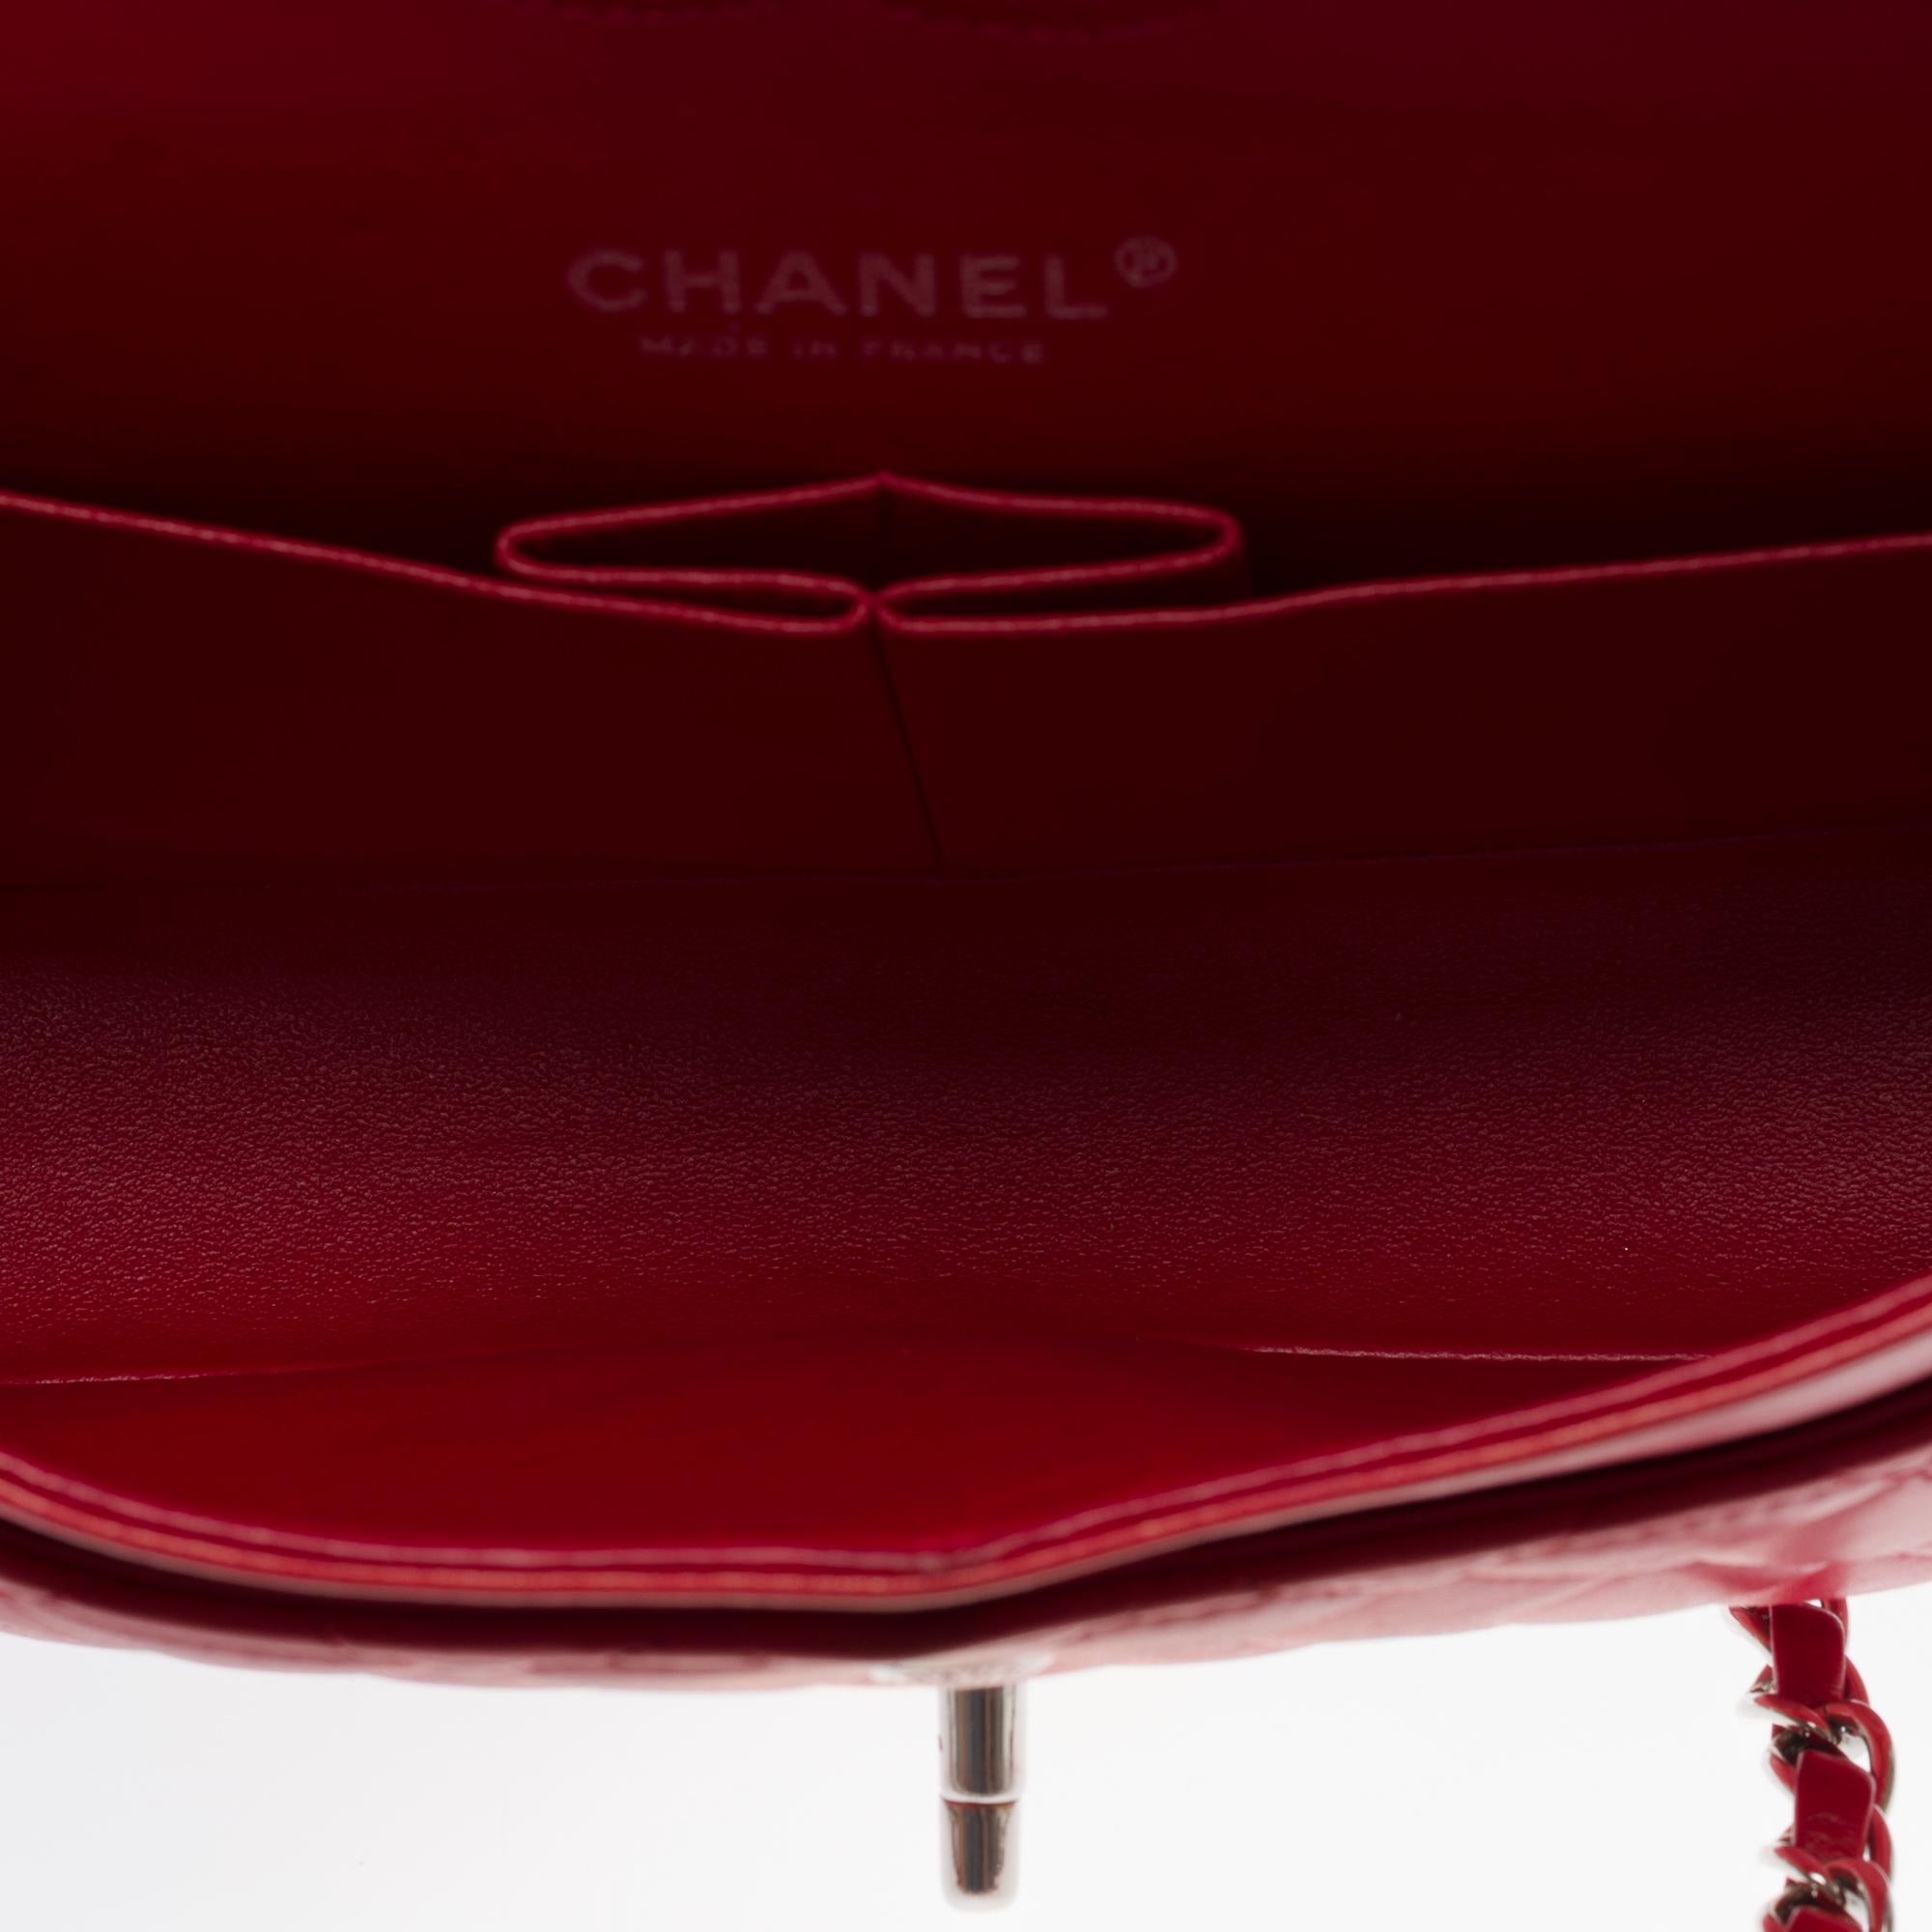 Chanel Timeless Medium double flap shoulder bag in Red lambskin leather, SHW For Sale 4